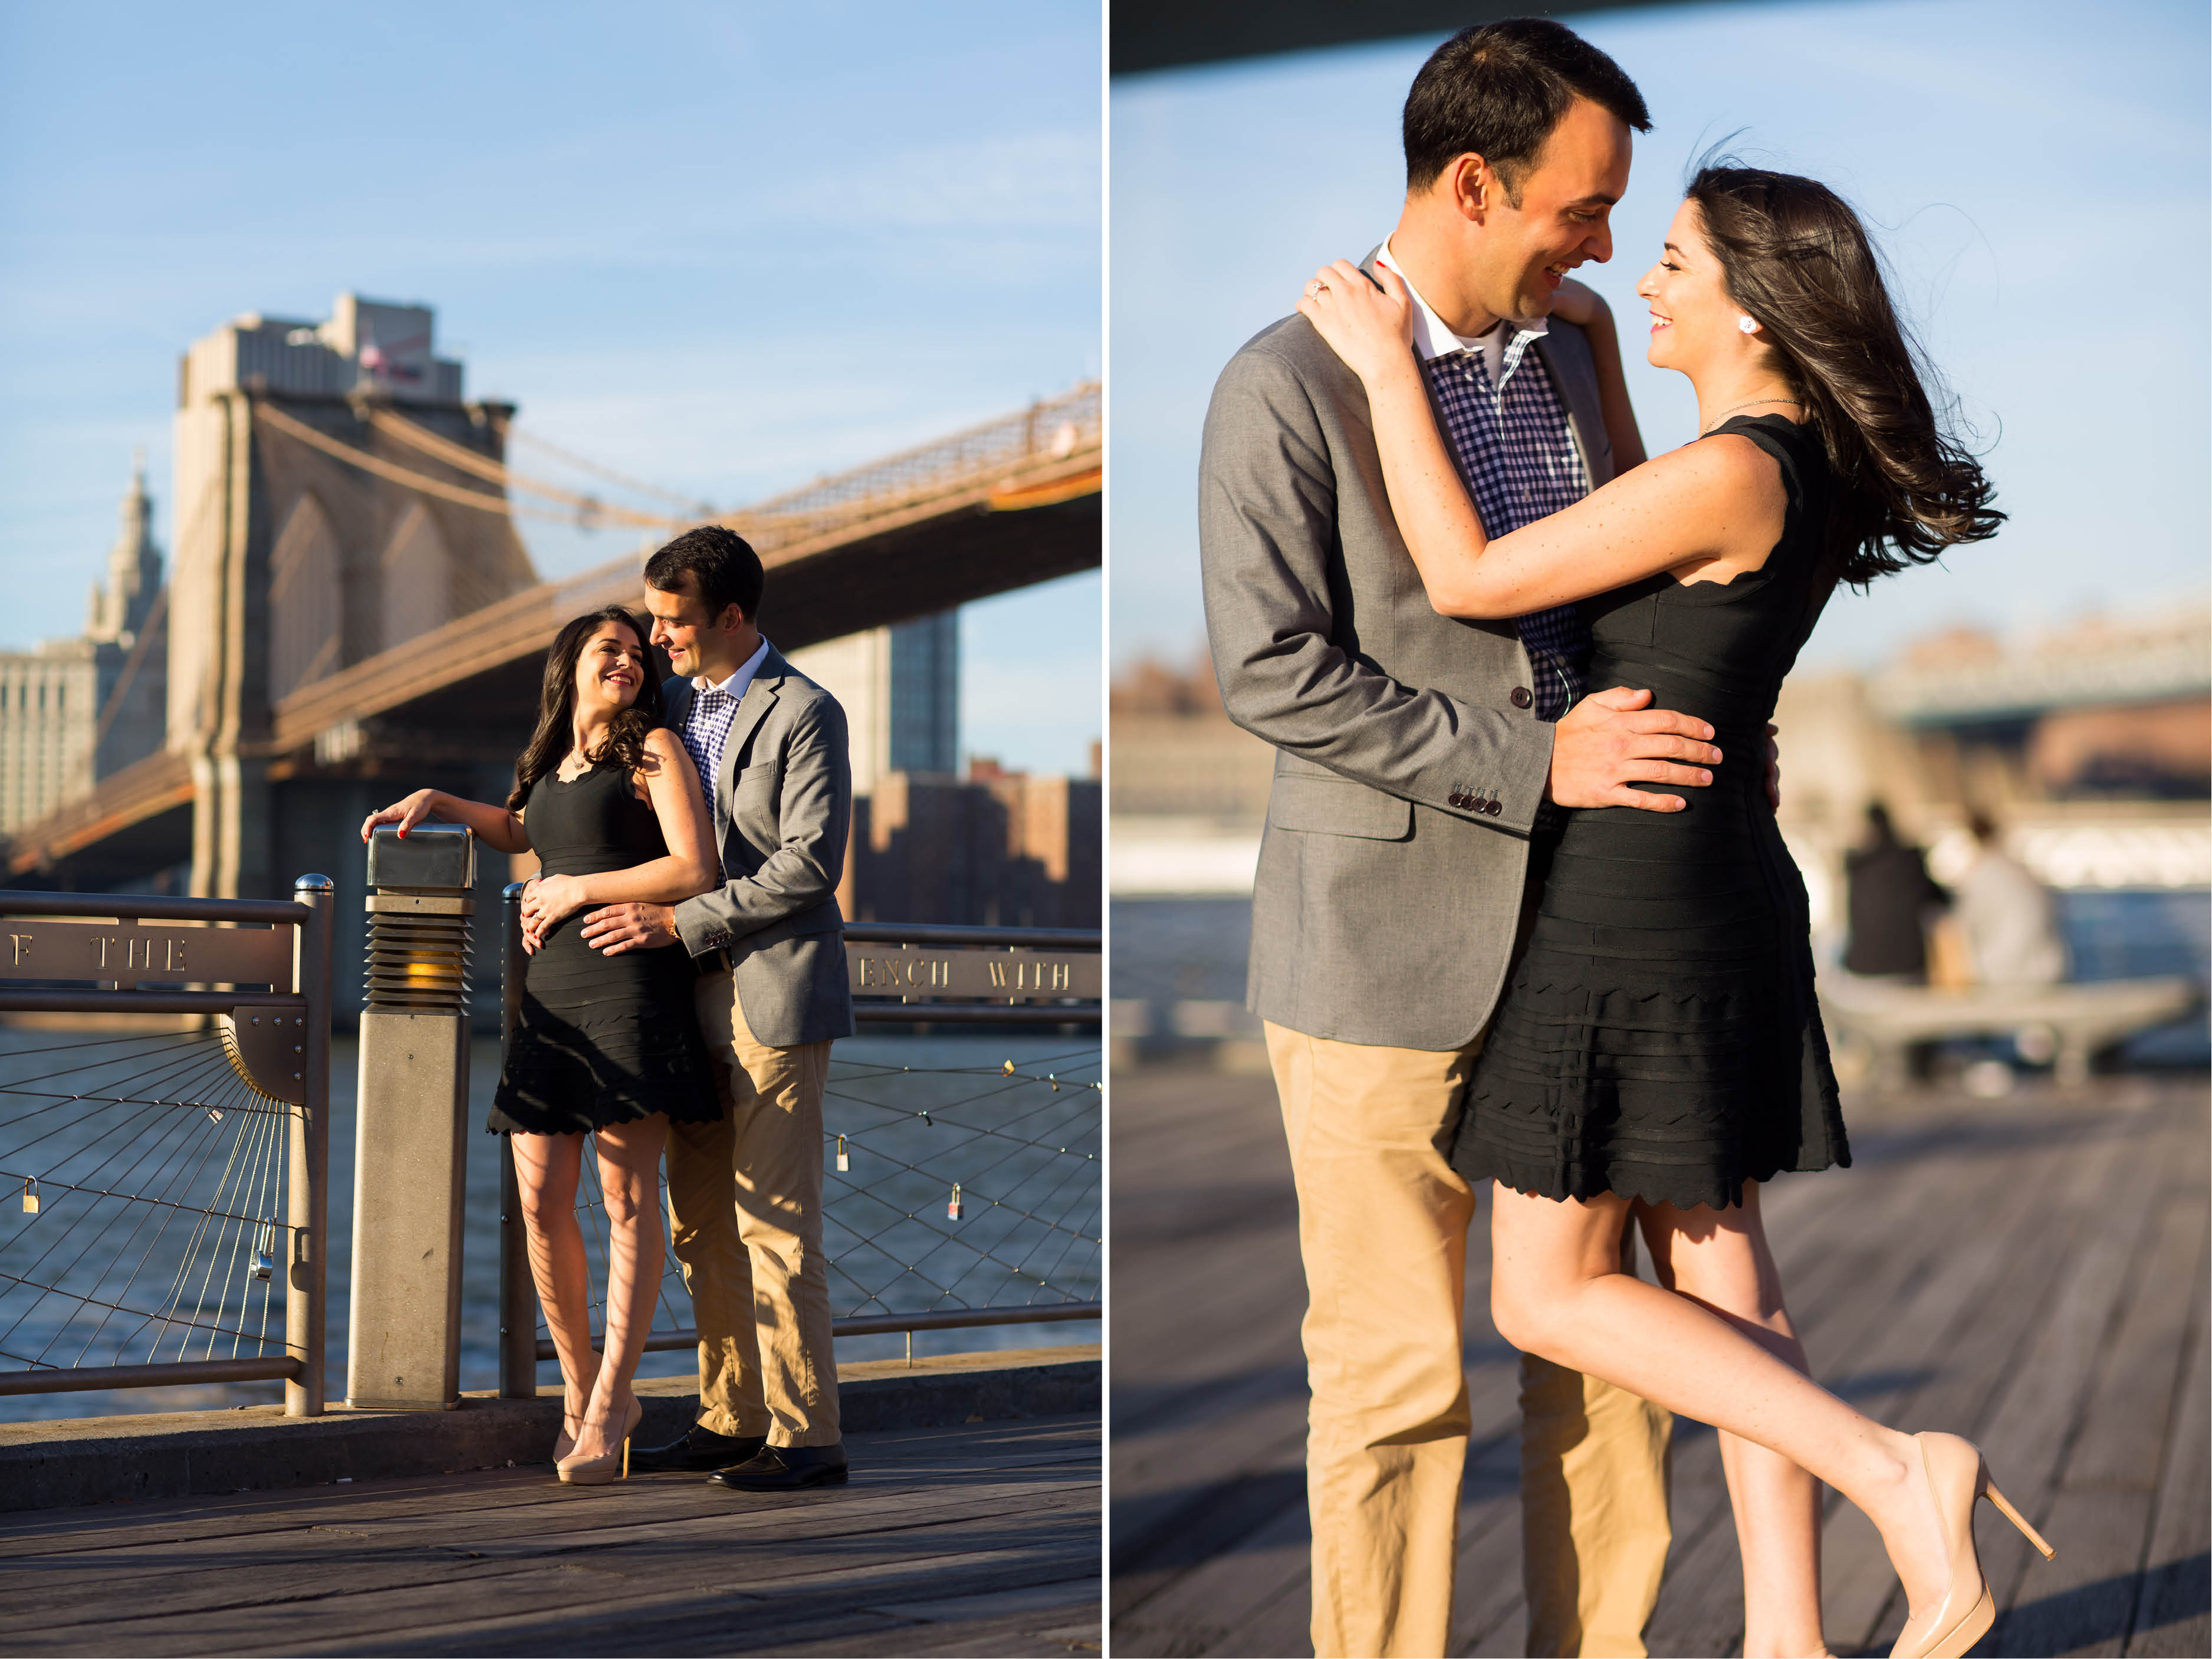 Emma_cleary_photography Dumbo Engagement shoot2